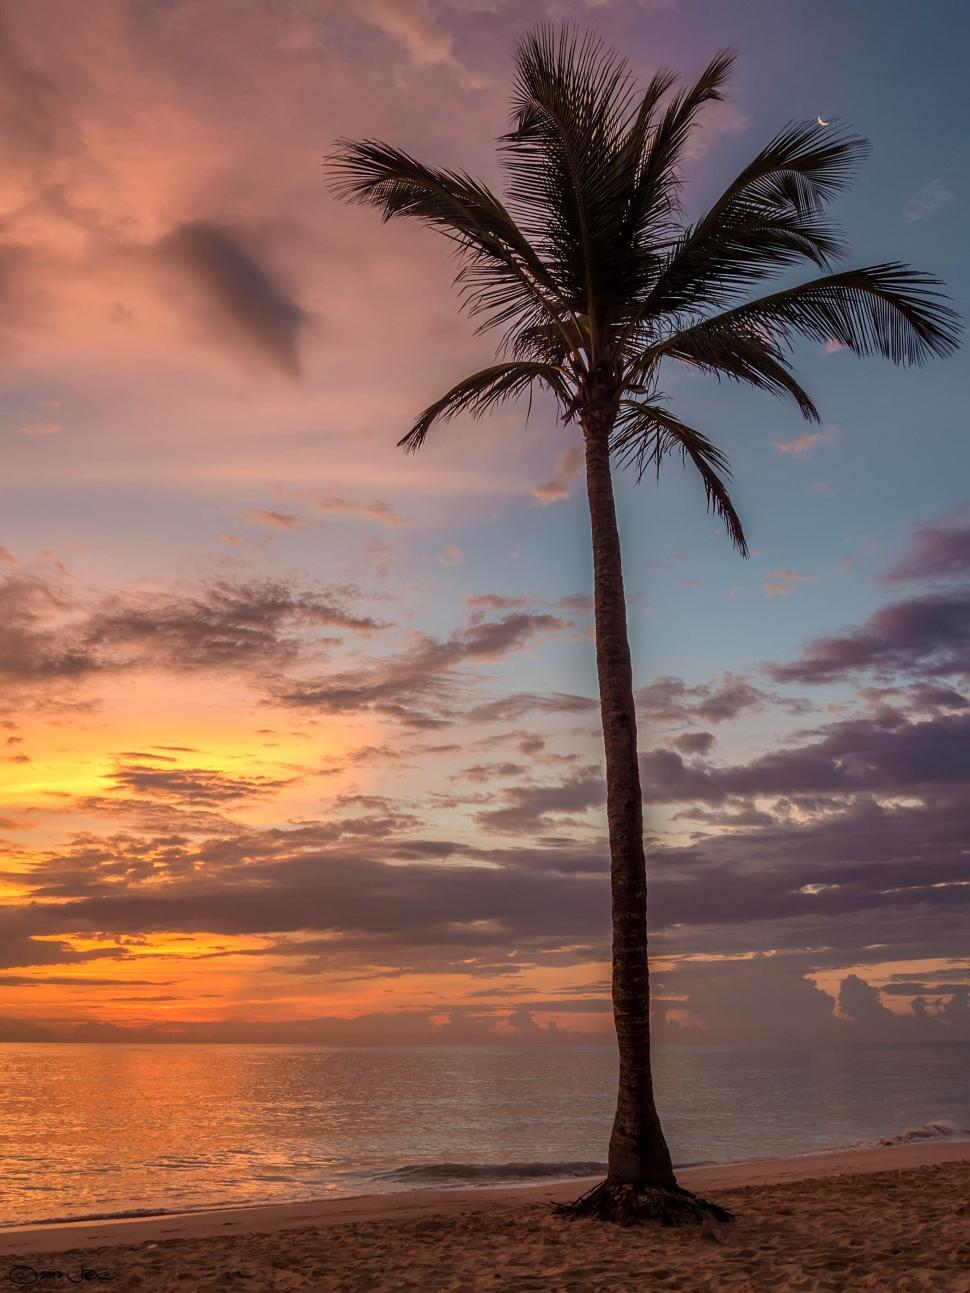 Free Image of Palm Tree Silhouette on Beach at Sunset 